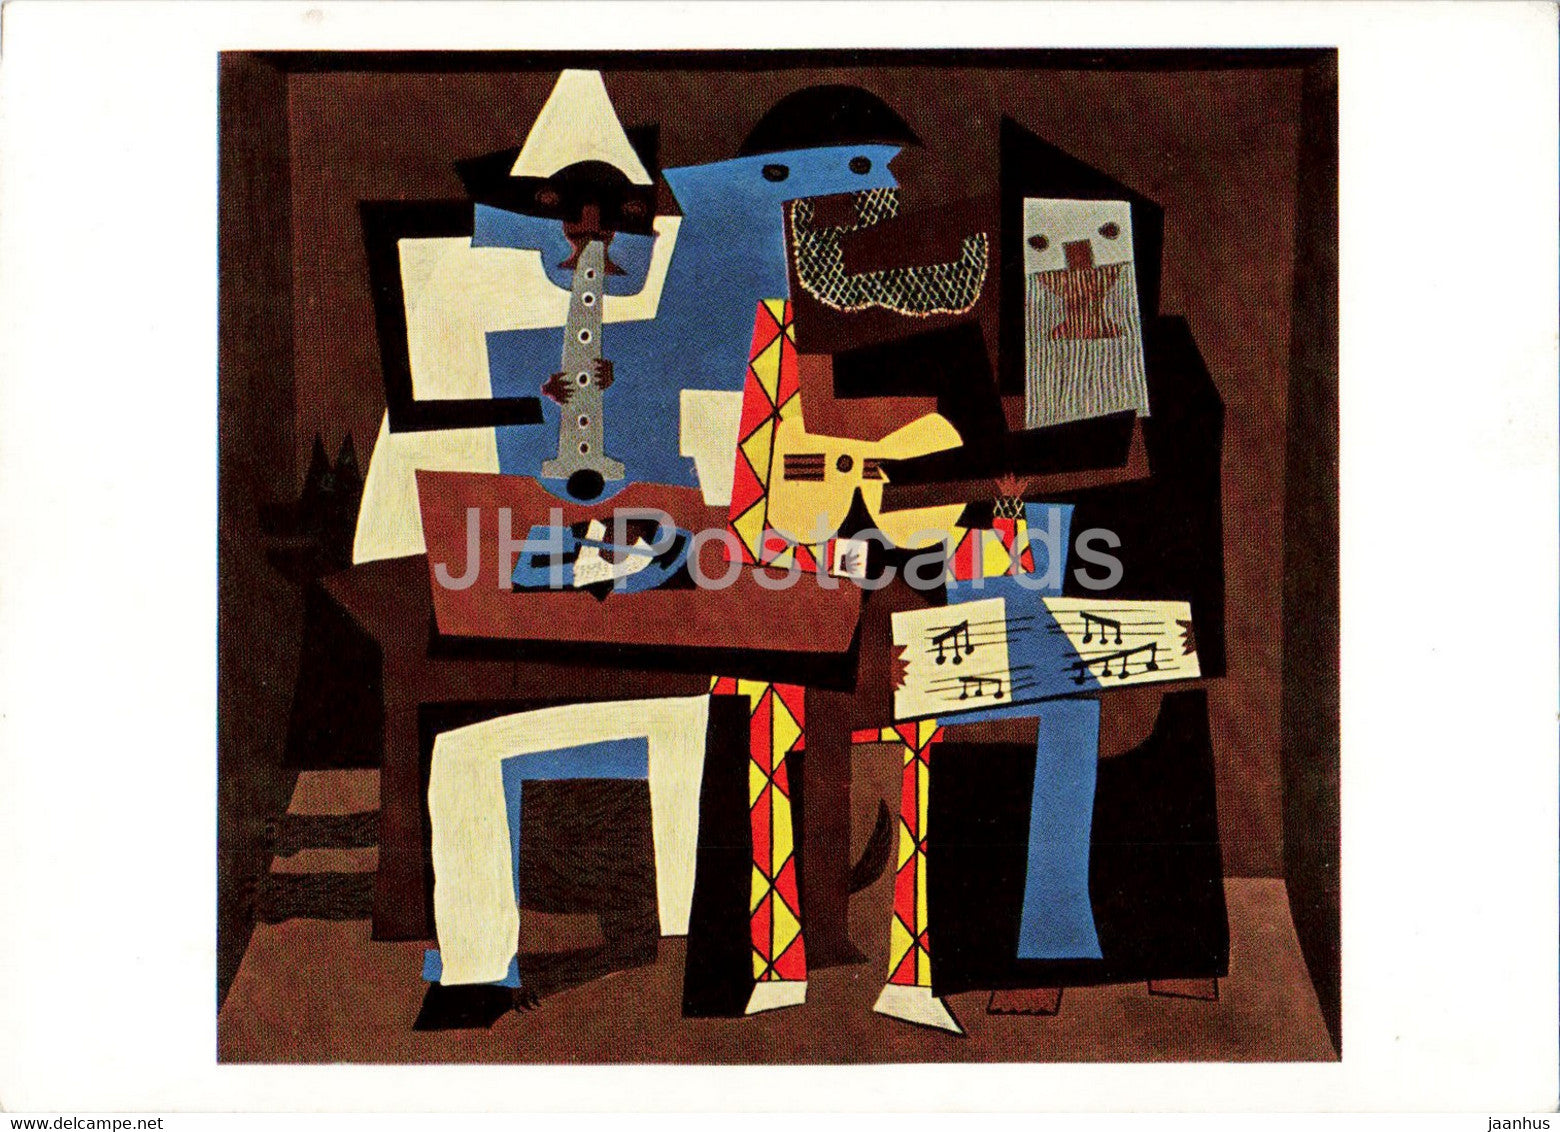 painting by Pablo Picasso - Drei Musikanten - Three Musicians - Spanish art - Germany - unused - JH Postcards